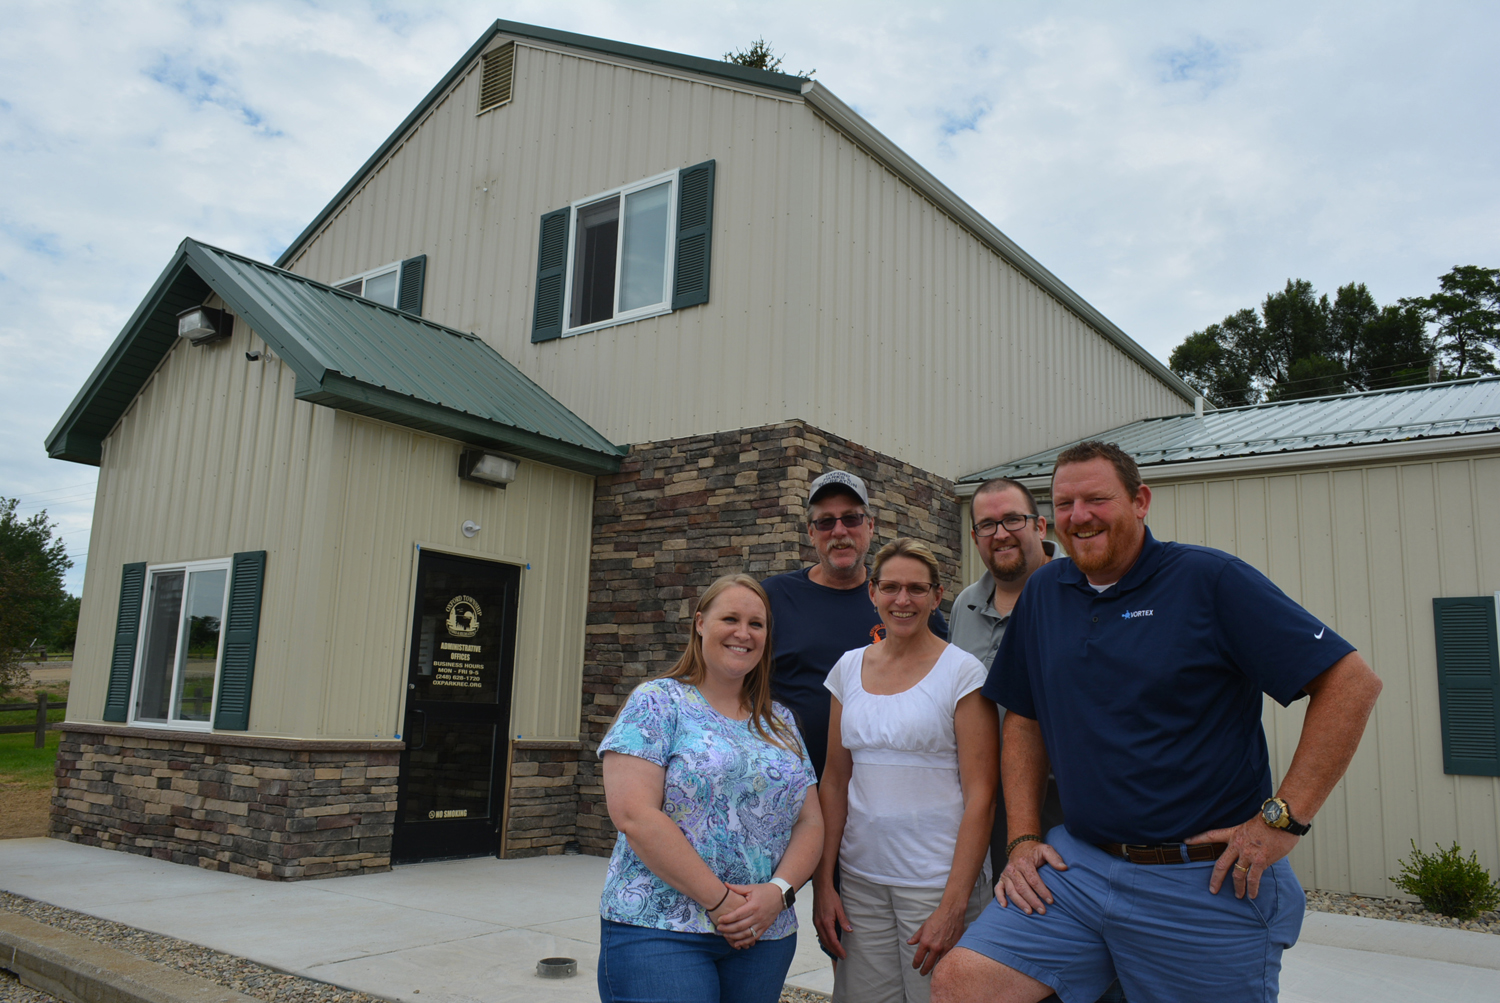 The staff of the Oxford Twp. Parks and Recreation Dept.  includes (from left) Lauren Smith, Jeff Kinasz, Dawn Medici, Dan Sullivan and Director Ron Davis. Photo by C.J. Carnacchio.